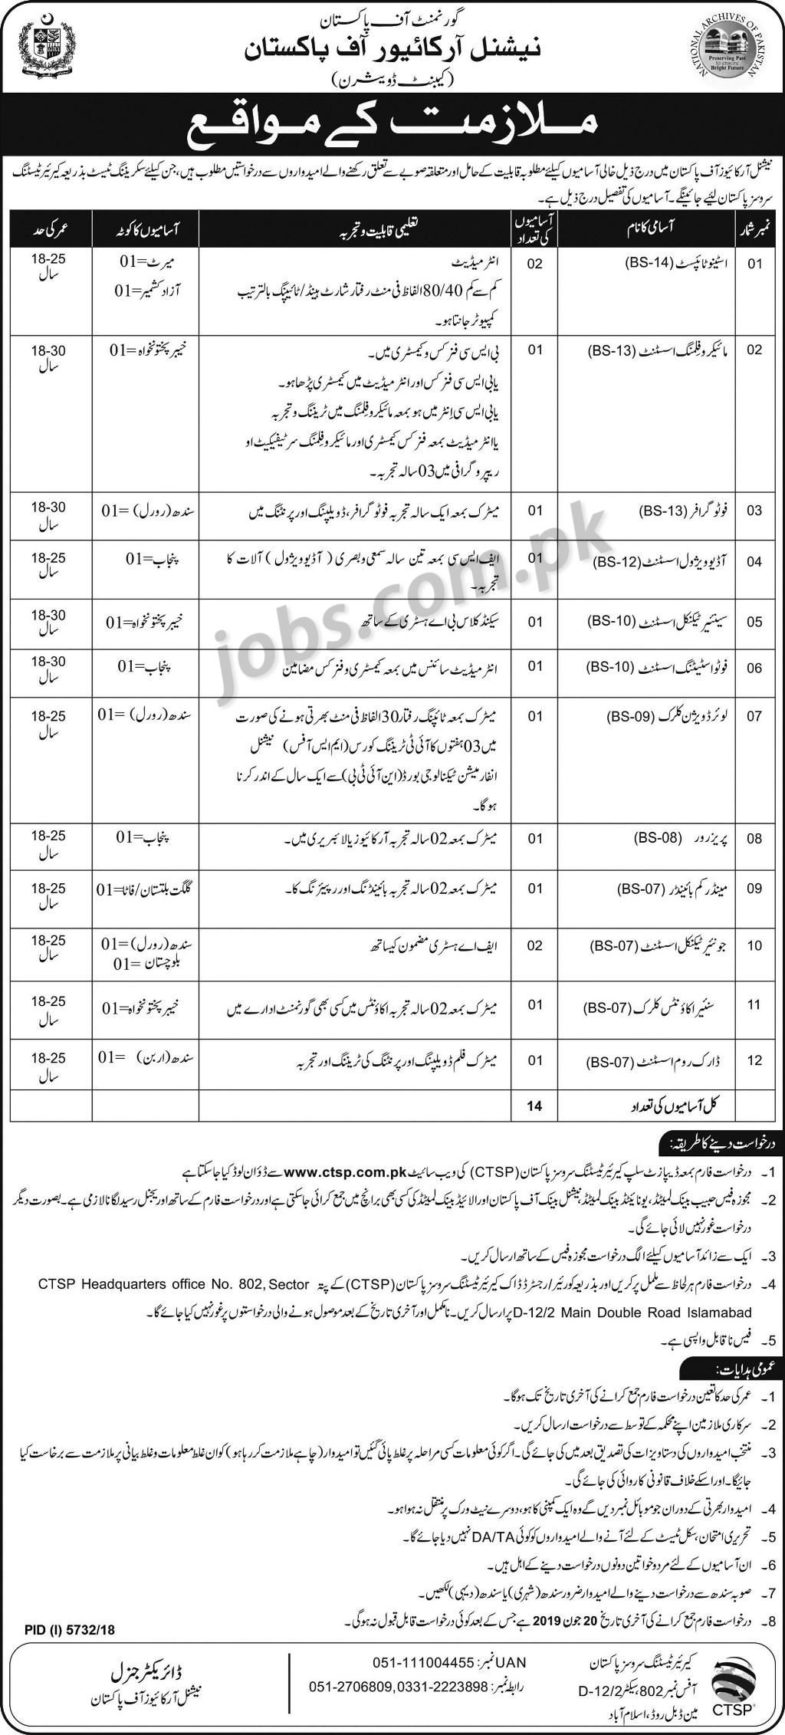 National Archives Of Pakistan Jobs 2019 for 14+ Stenotypists, LDC, Accounts Clerks, Multimedia & Other Staff (Download CTSP Form)